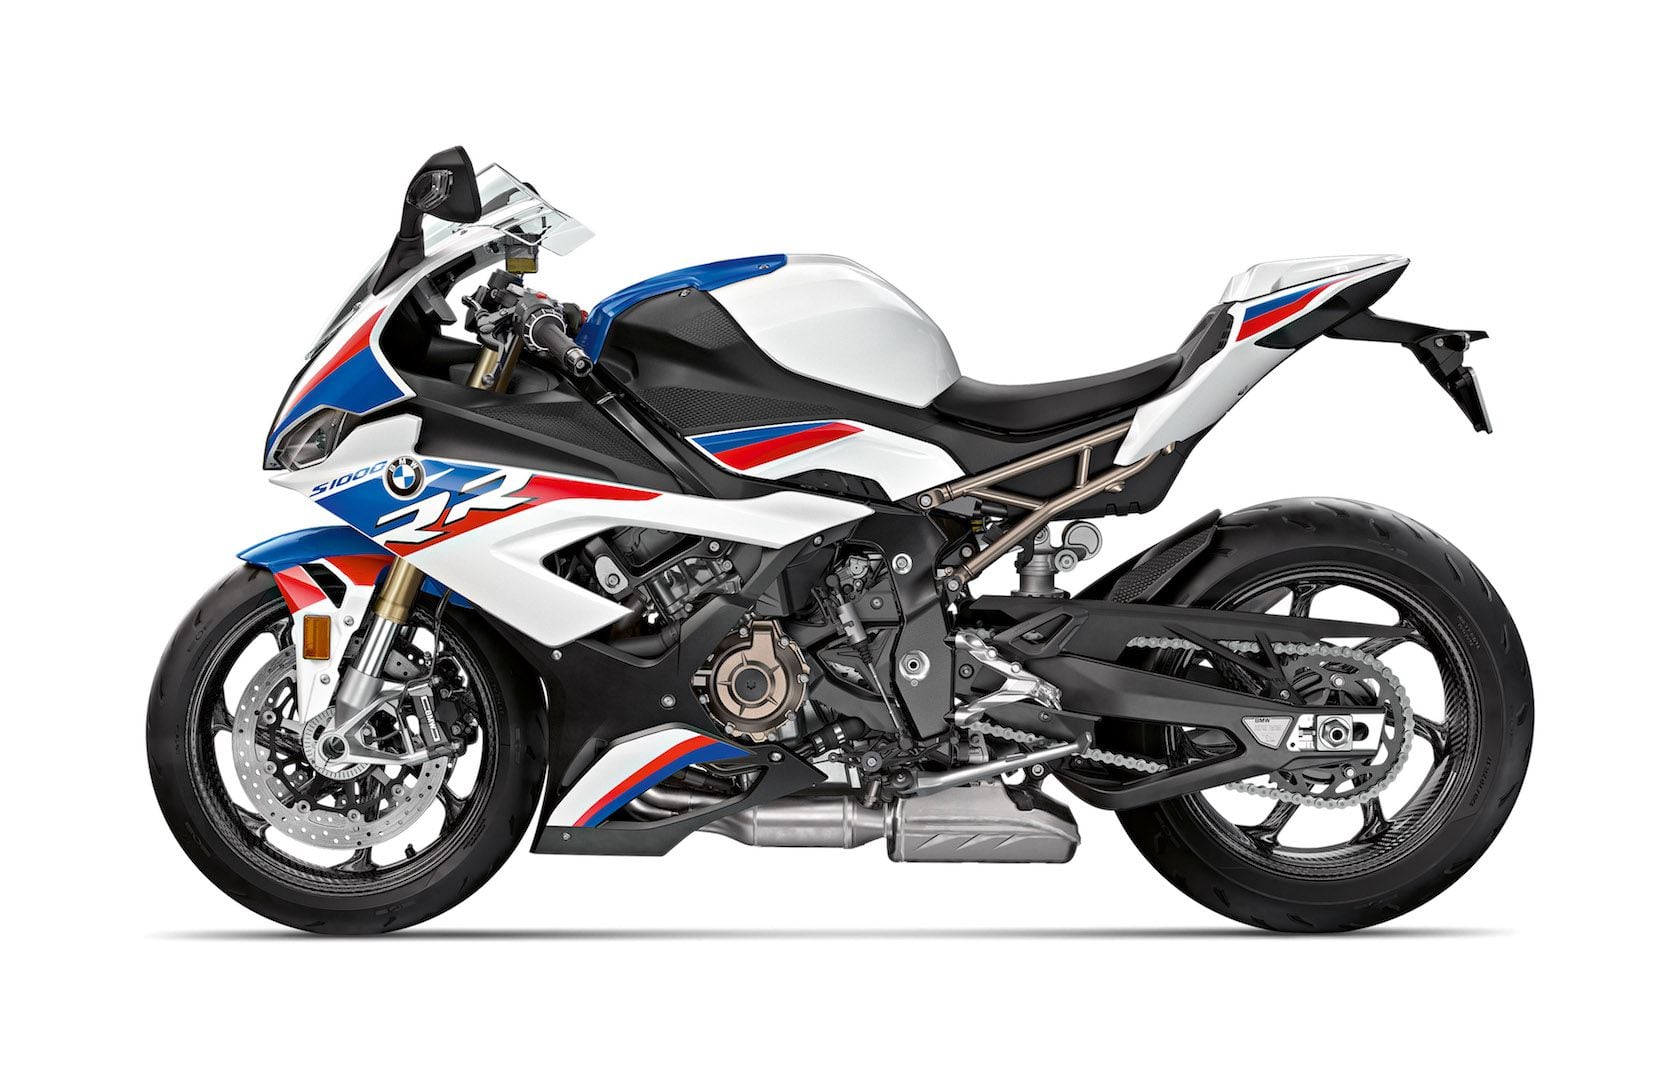 2019 BMW S 1000 RR Buyer's Guide: Specs, Photos, Price | Cycle World